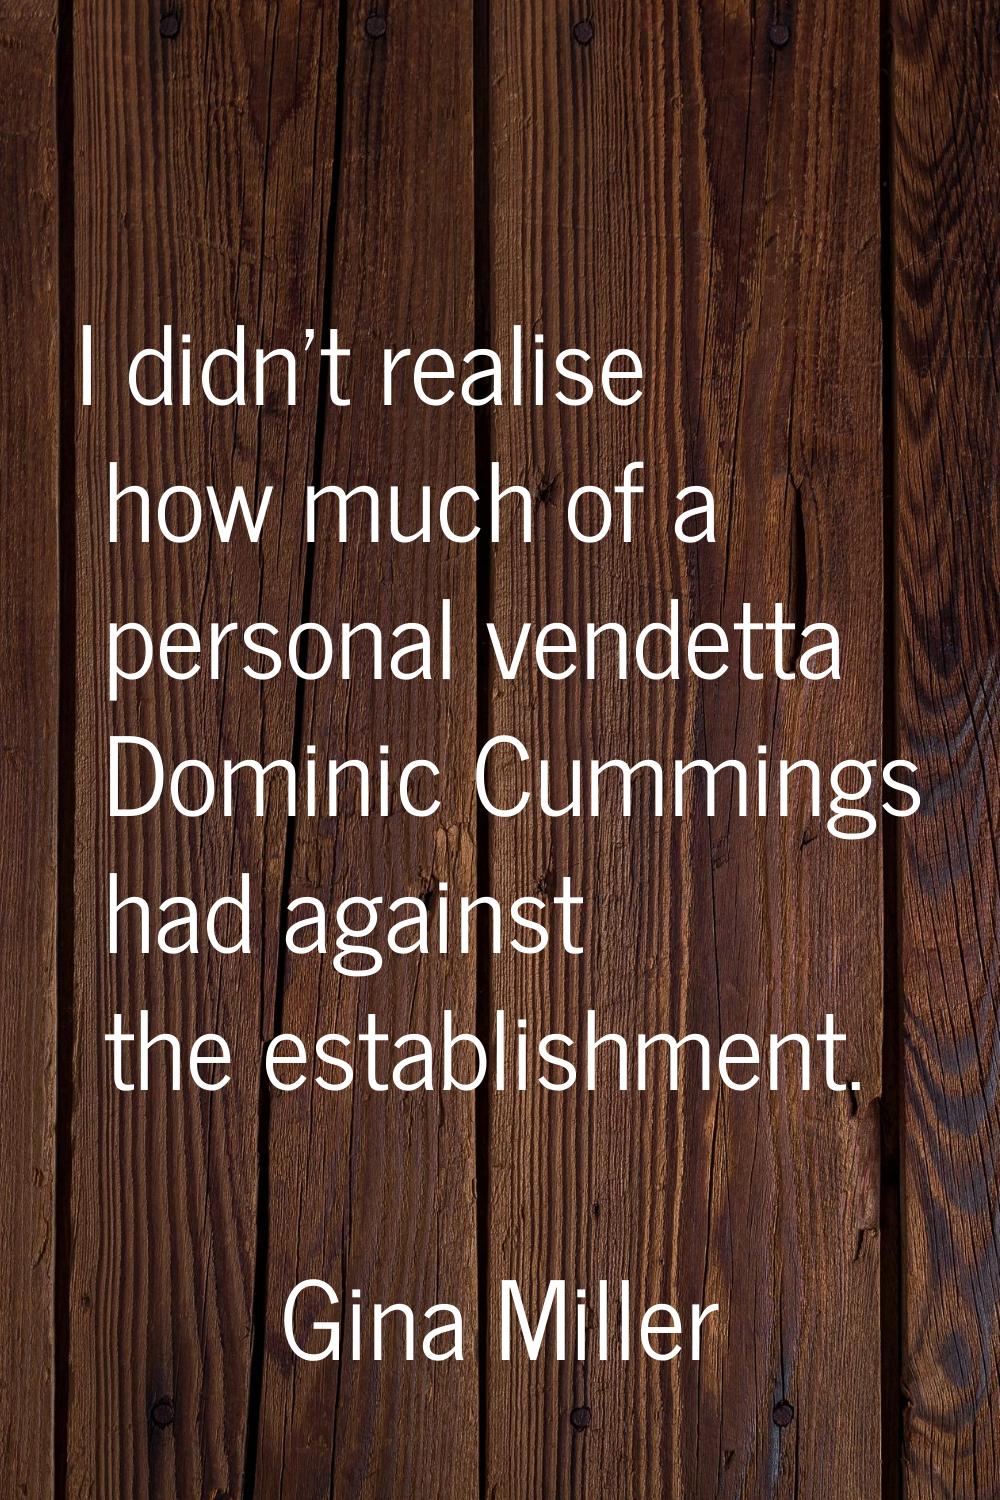 I didn't realise how much of a personal vendetta Dominic Cummings had against the establishment.